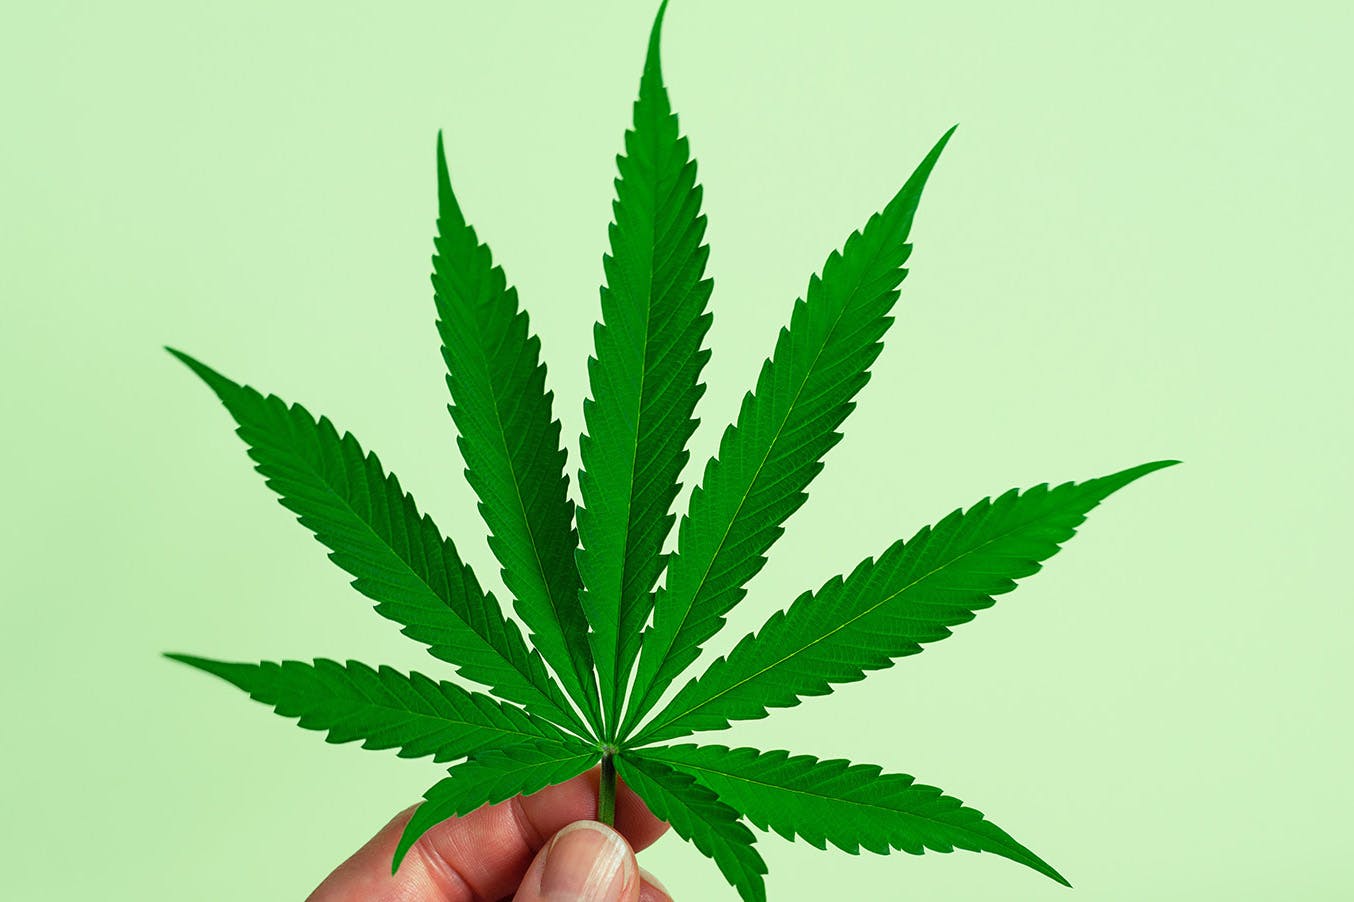 Hemp plant being held in hand on green background